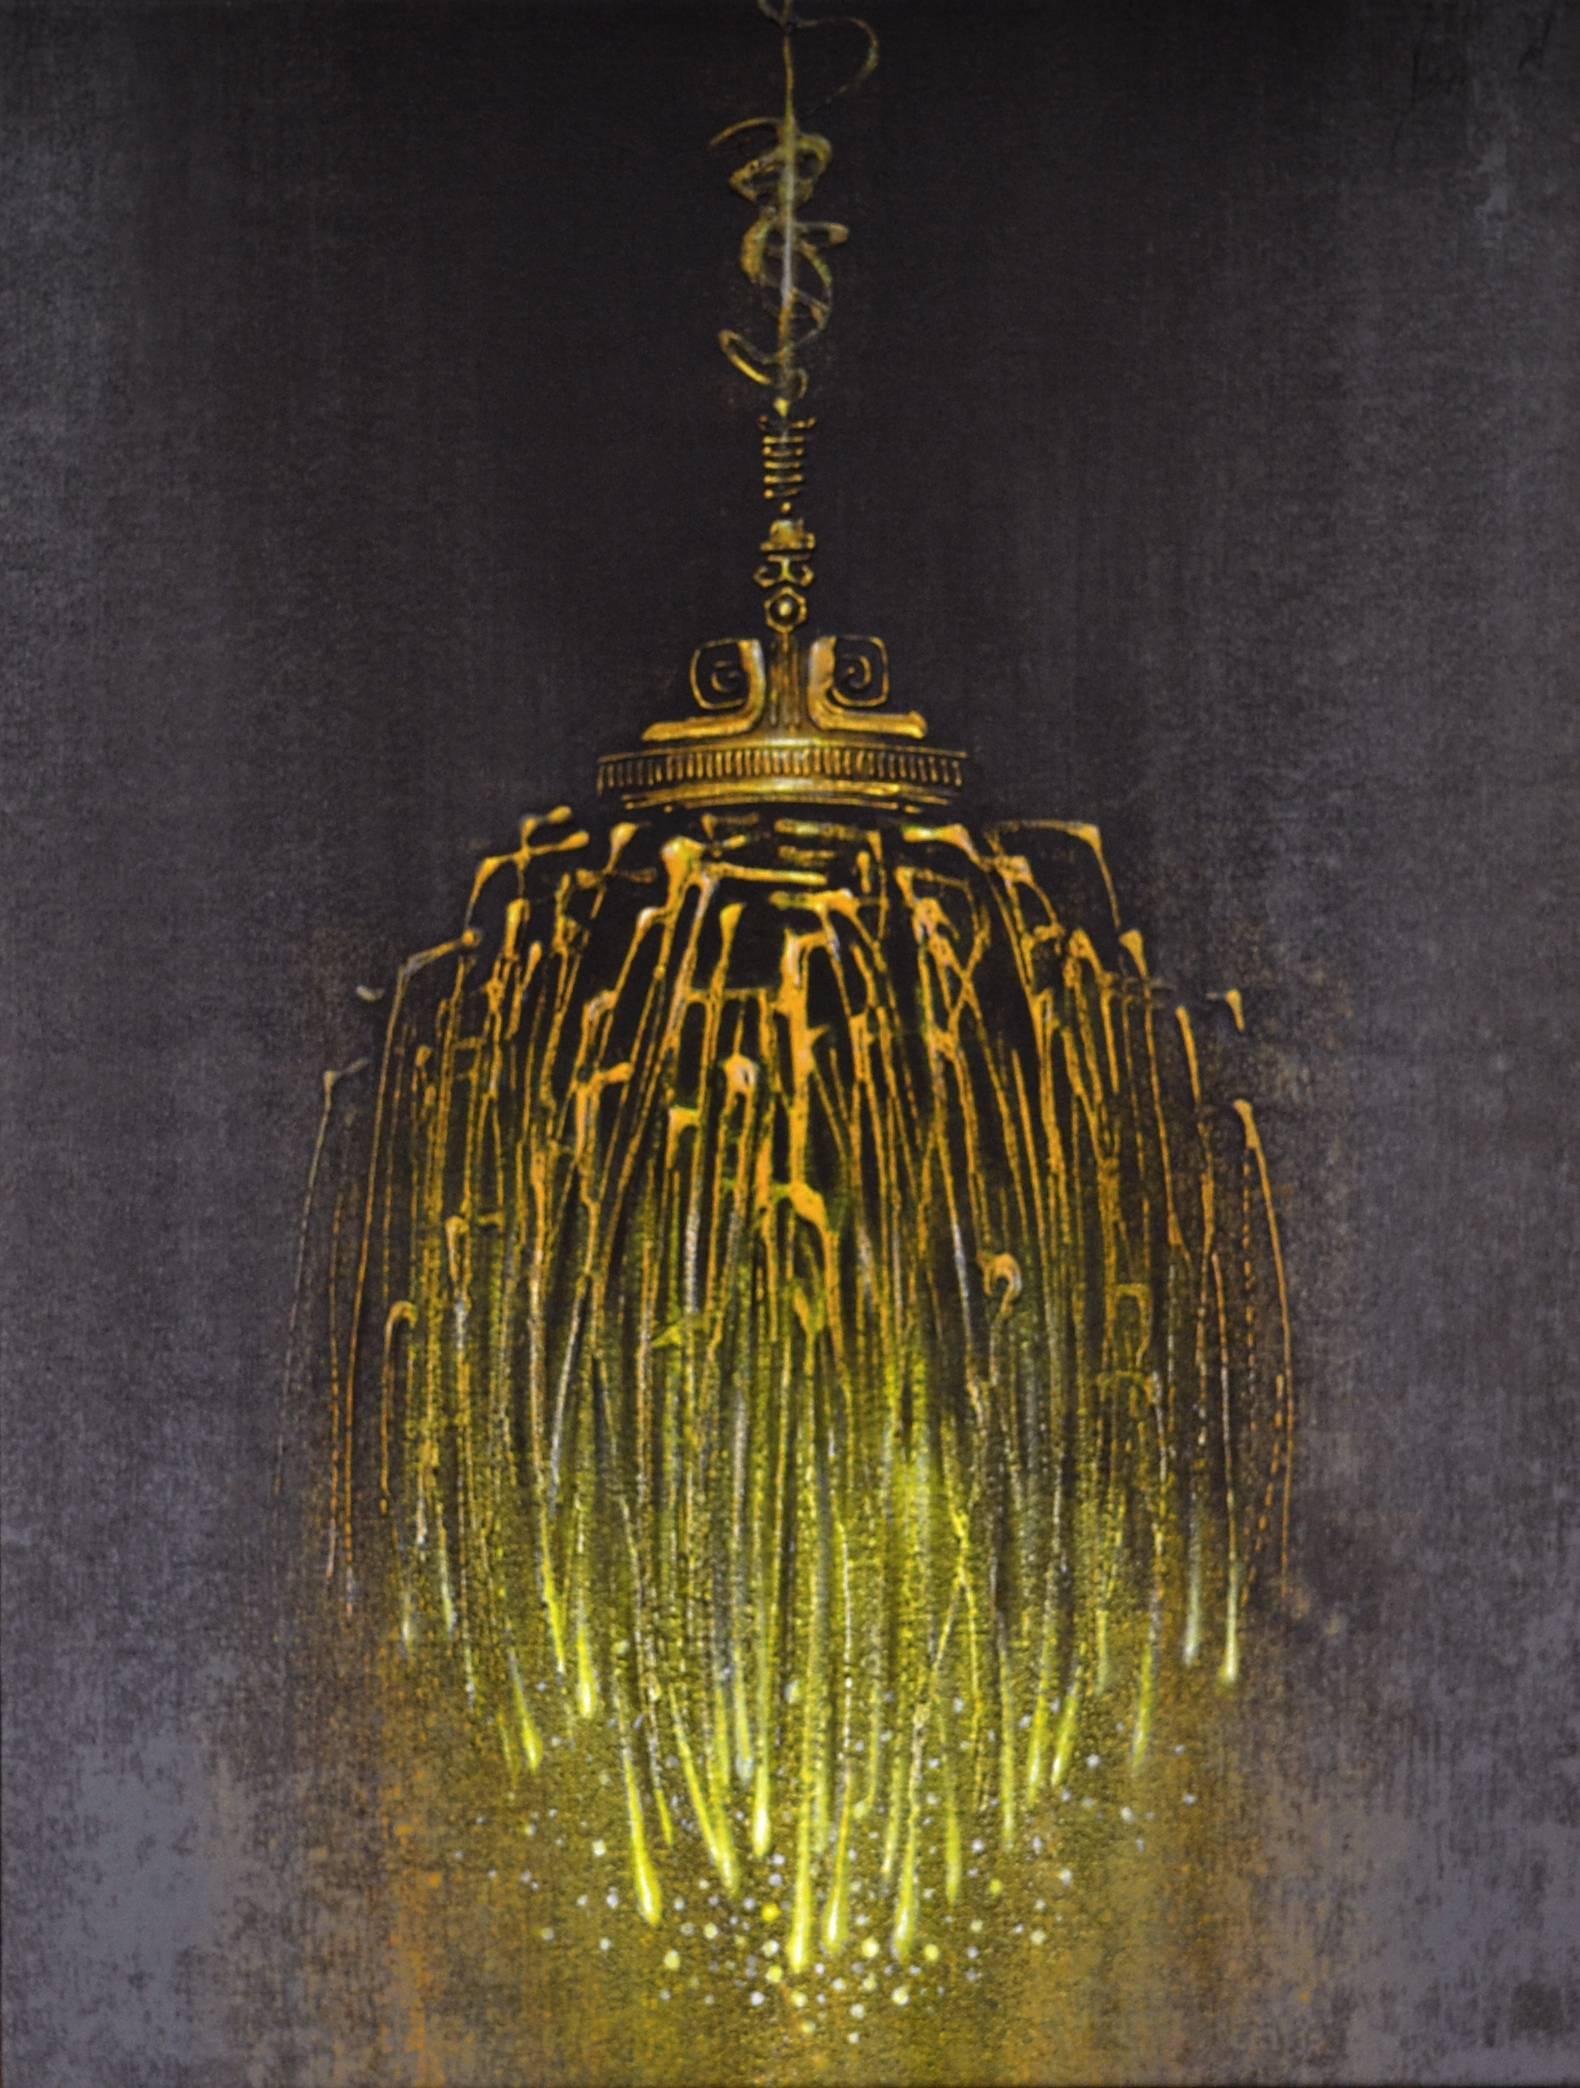 Vishal Joshi Interior Painting - Chandelier, Abstract, Acrylic Painting, Grey, Yellow, Gold colors "In Stock"